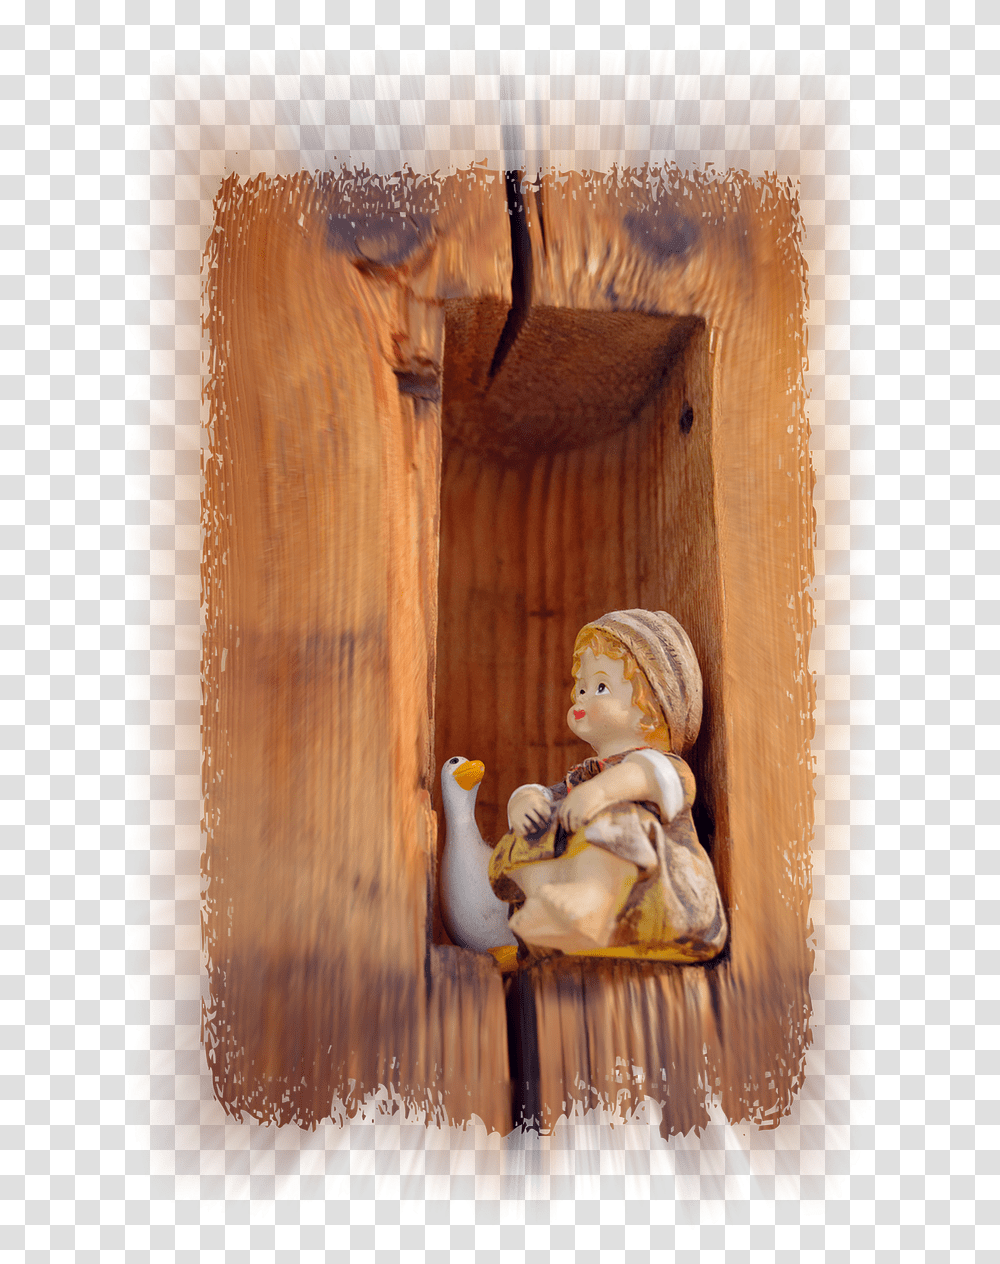 Boy Goose Porcelain Figurine Free Photo Portable Network Graphics, Wood, Bird, Toy, Outdoors Transparent Png